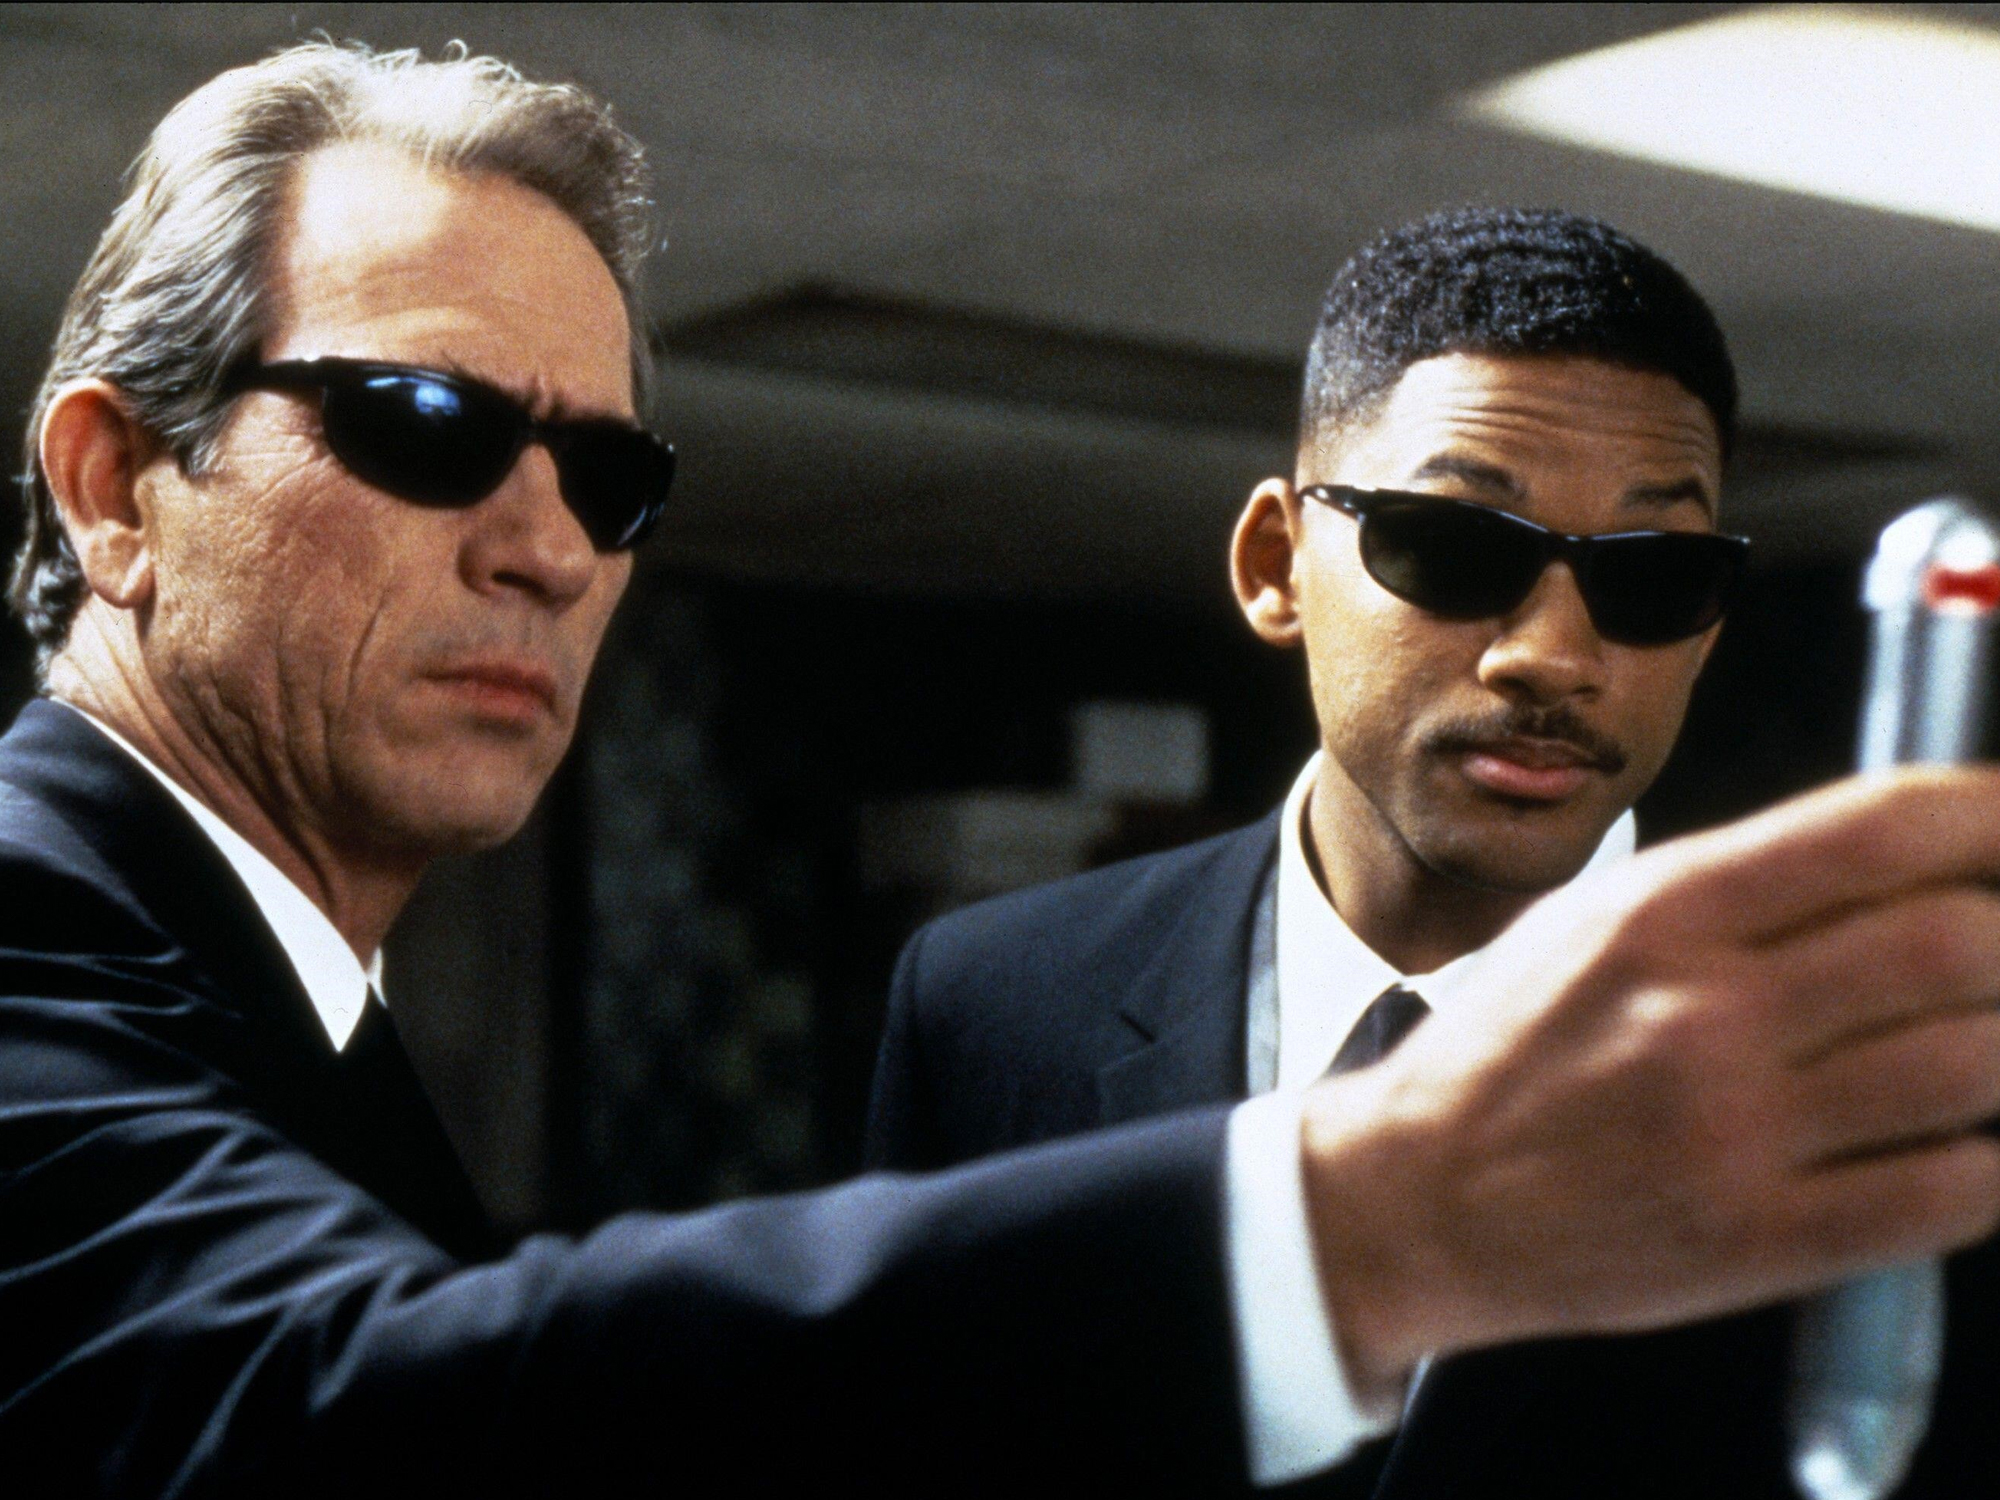 How Men in Black subverted blockbuster tropes to become box office gold